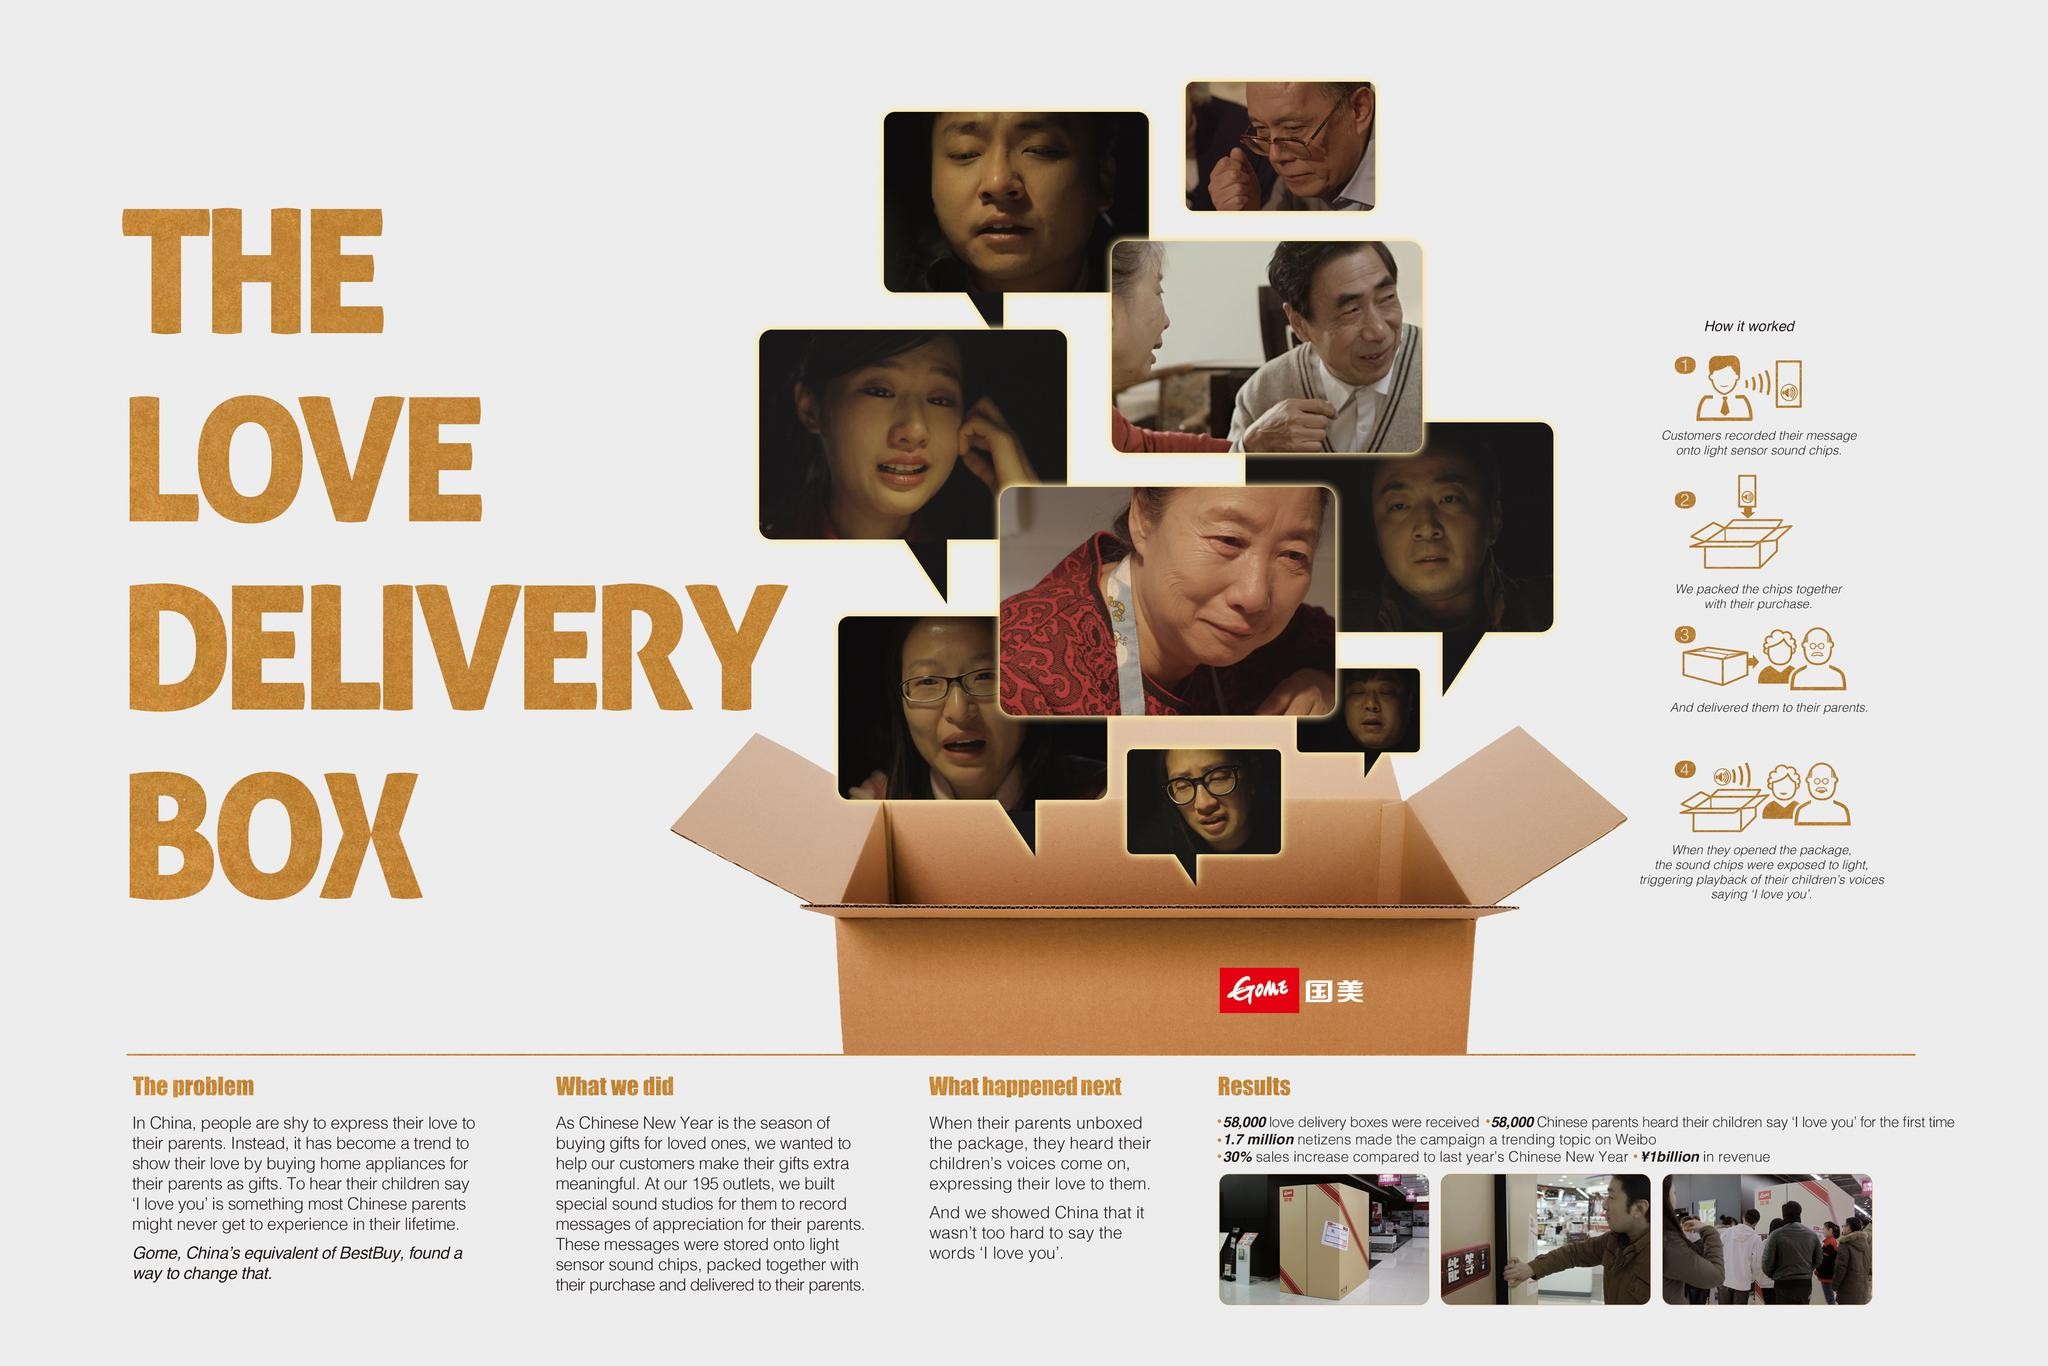 THE LOVE DELIVERY BOX